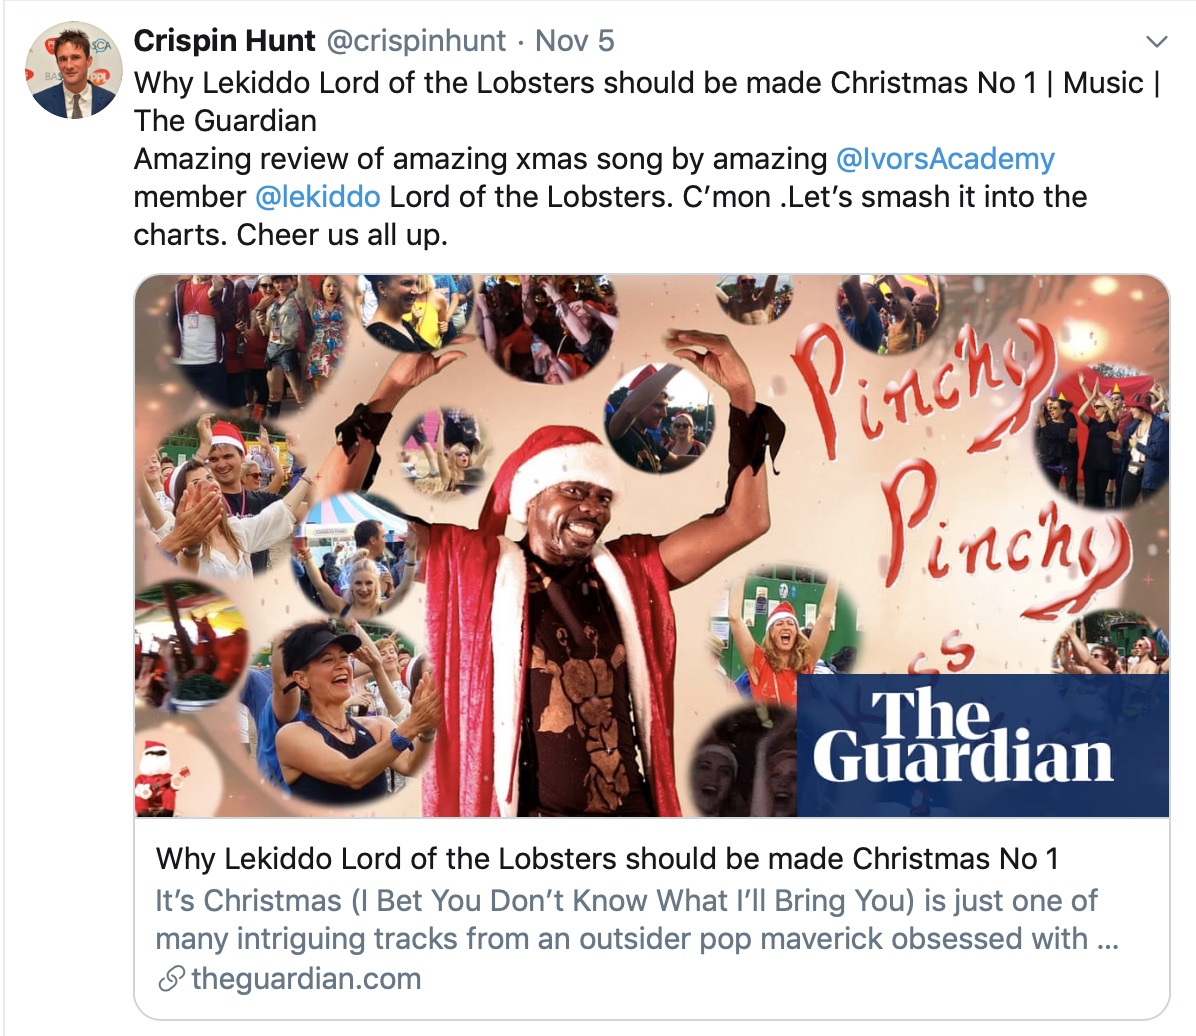 Crispin Hunt,  @crispinhunt The Ivors Academy say: 'Why LEKIDDO - Lord of The Lobtster! should be made Christmas No1 | Music | The Guardian - Amazing review in The Guardian of amazing Xmas song by amazing @IvorsAcademy member LEKIDDO - Lord of The Lobsters! Câ€™mon .Letâ€™s smash it into the charts. Cheer us all up' 